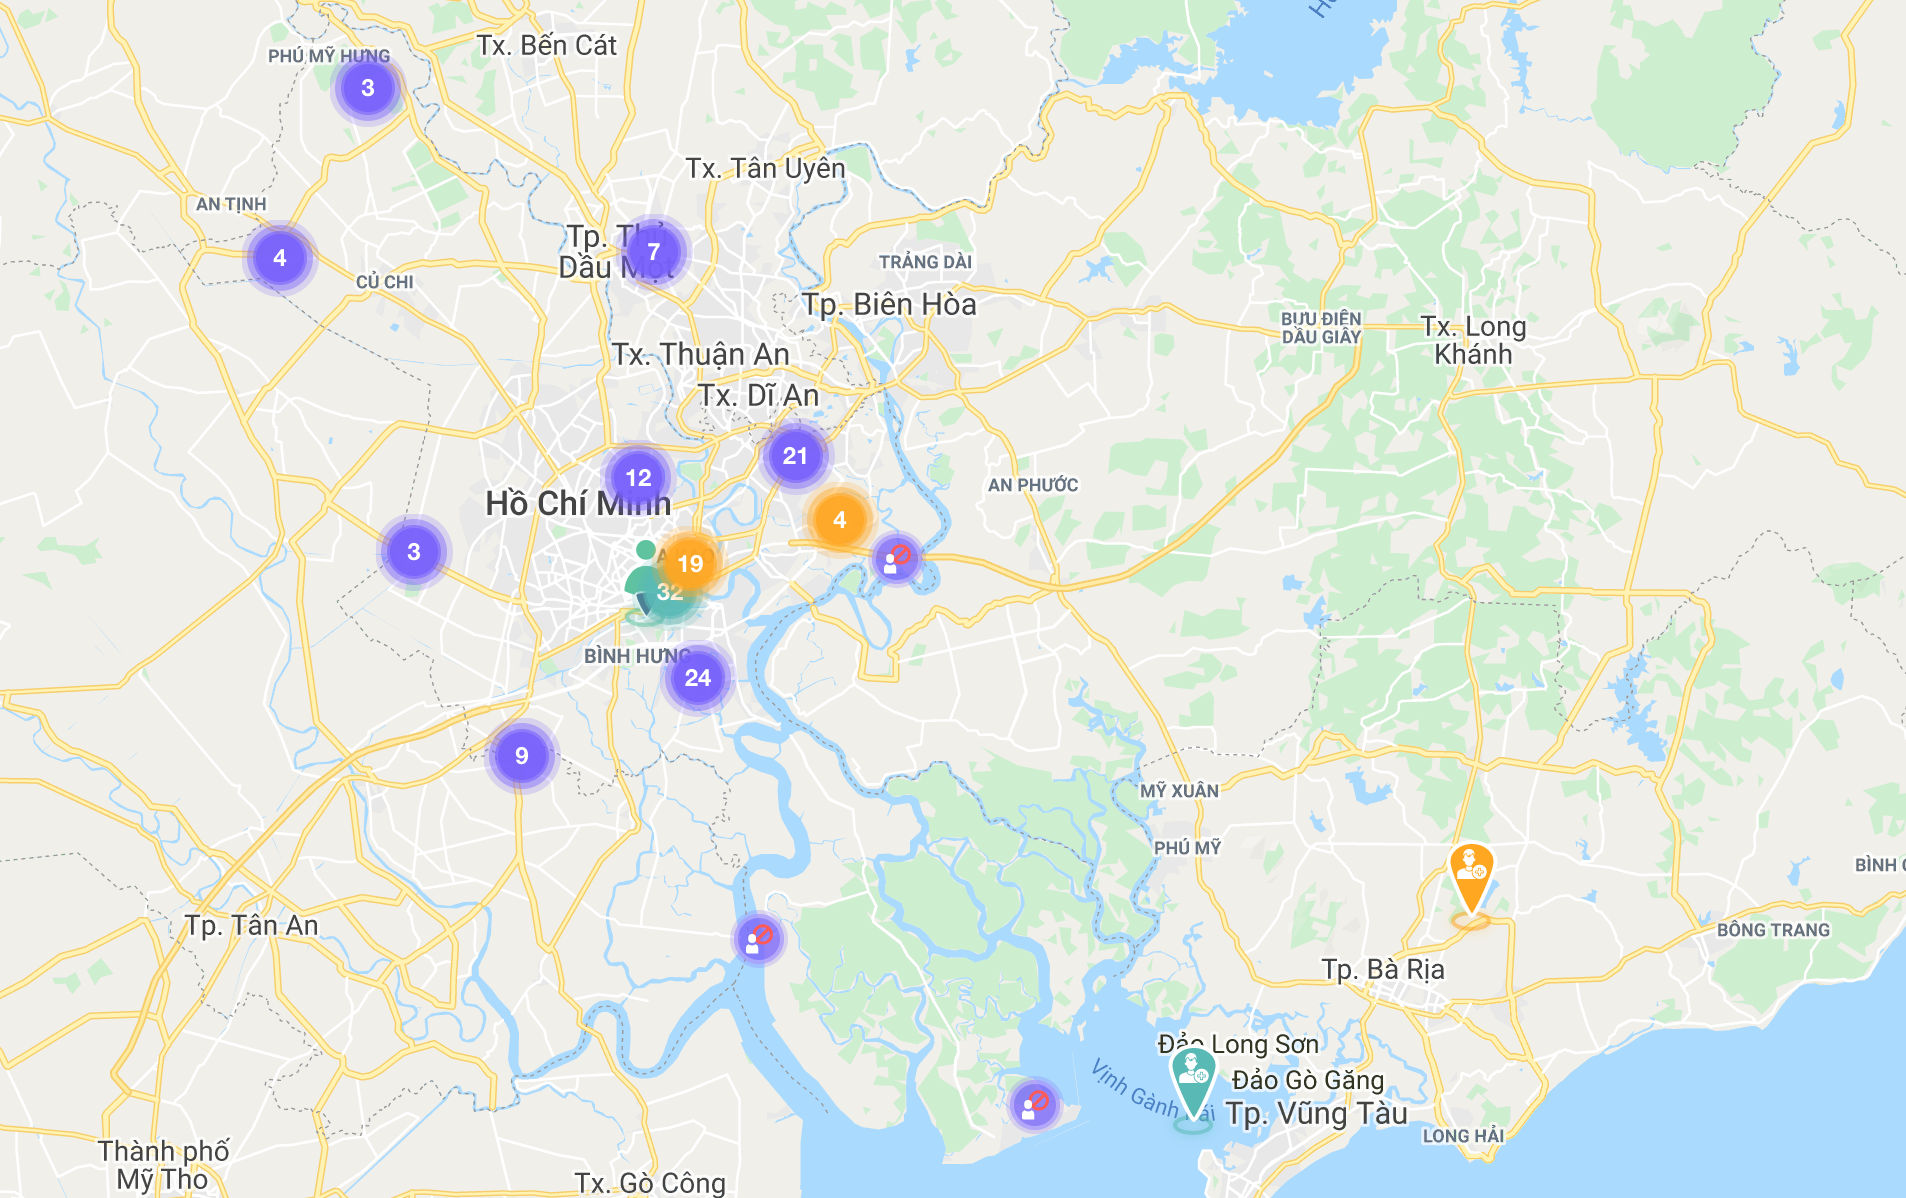 This screenshot shows different types of data available on the vietnamcovid19.info live map.